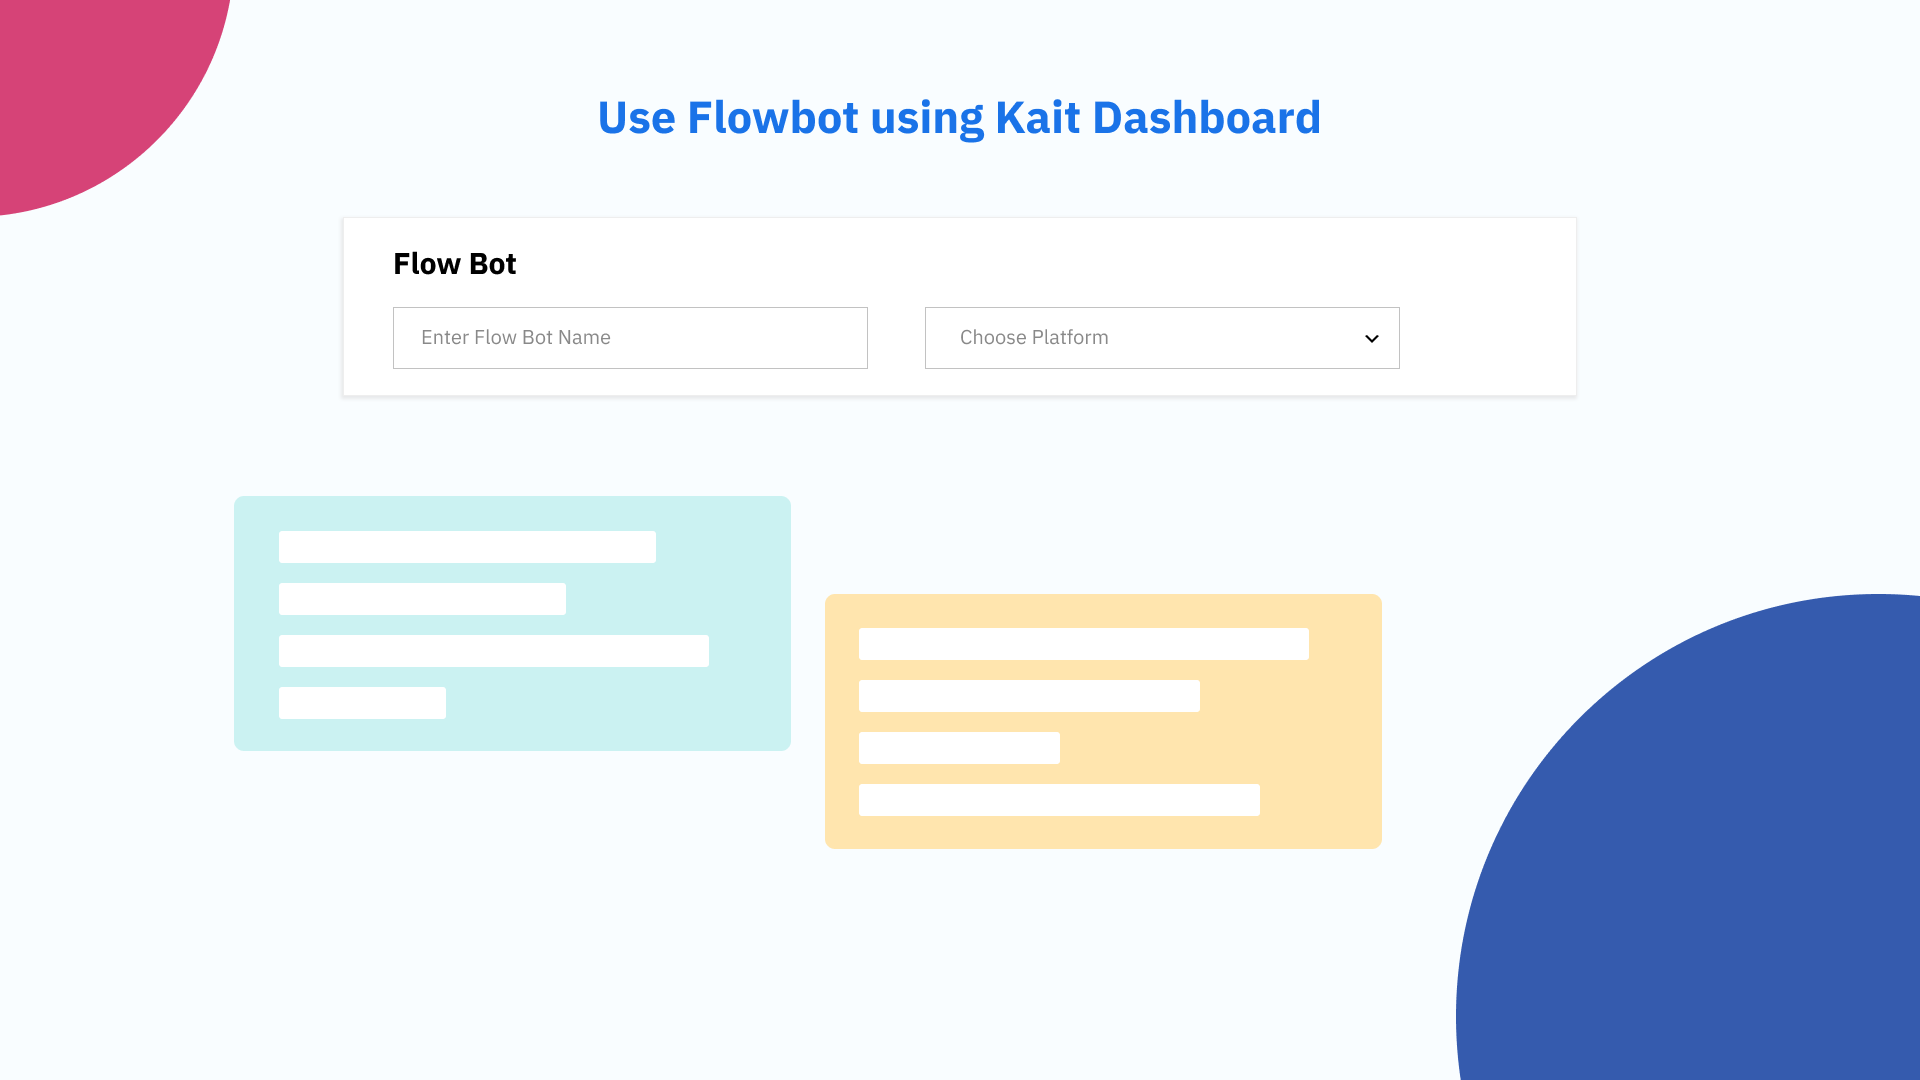 How to Use Flowbot using Kait Dashboard?